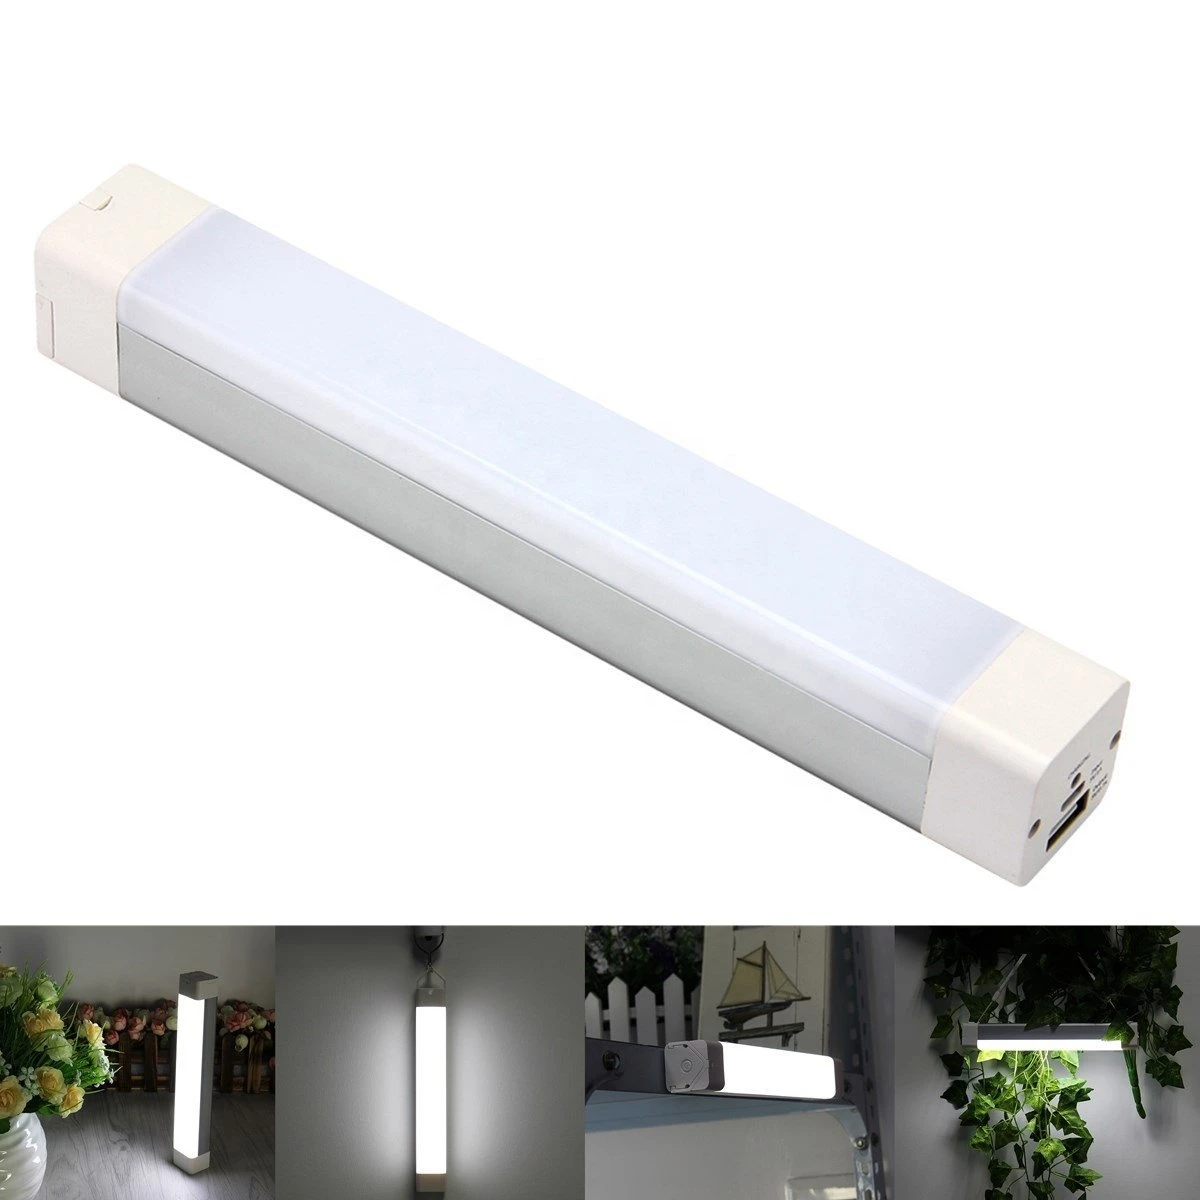 Portable rechargeable solar power system led light led emergency charging lights for homes